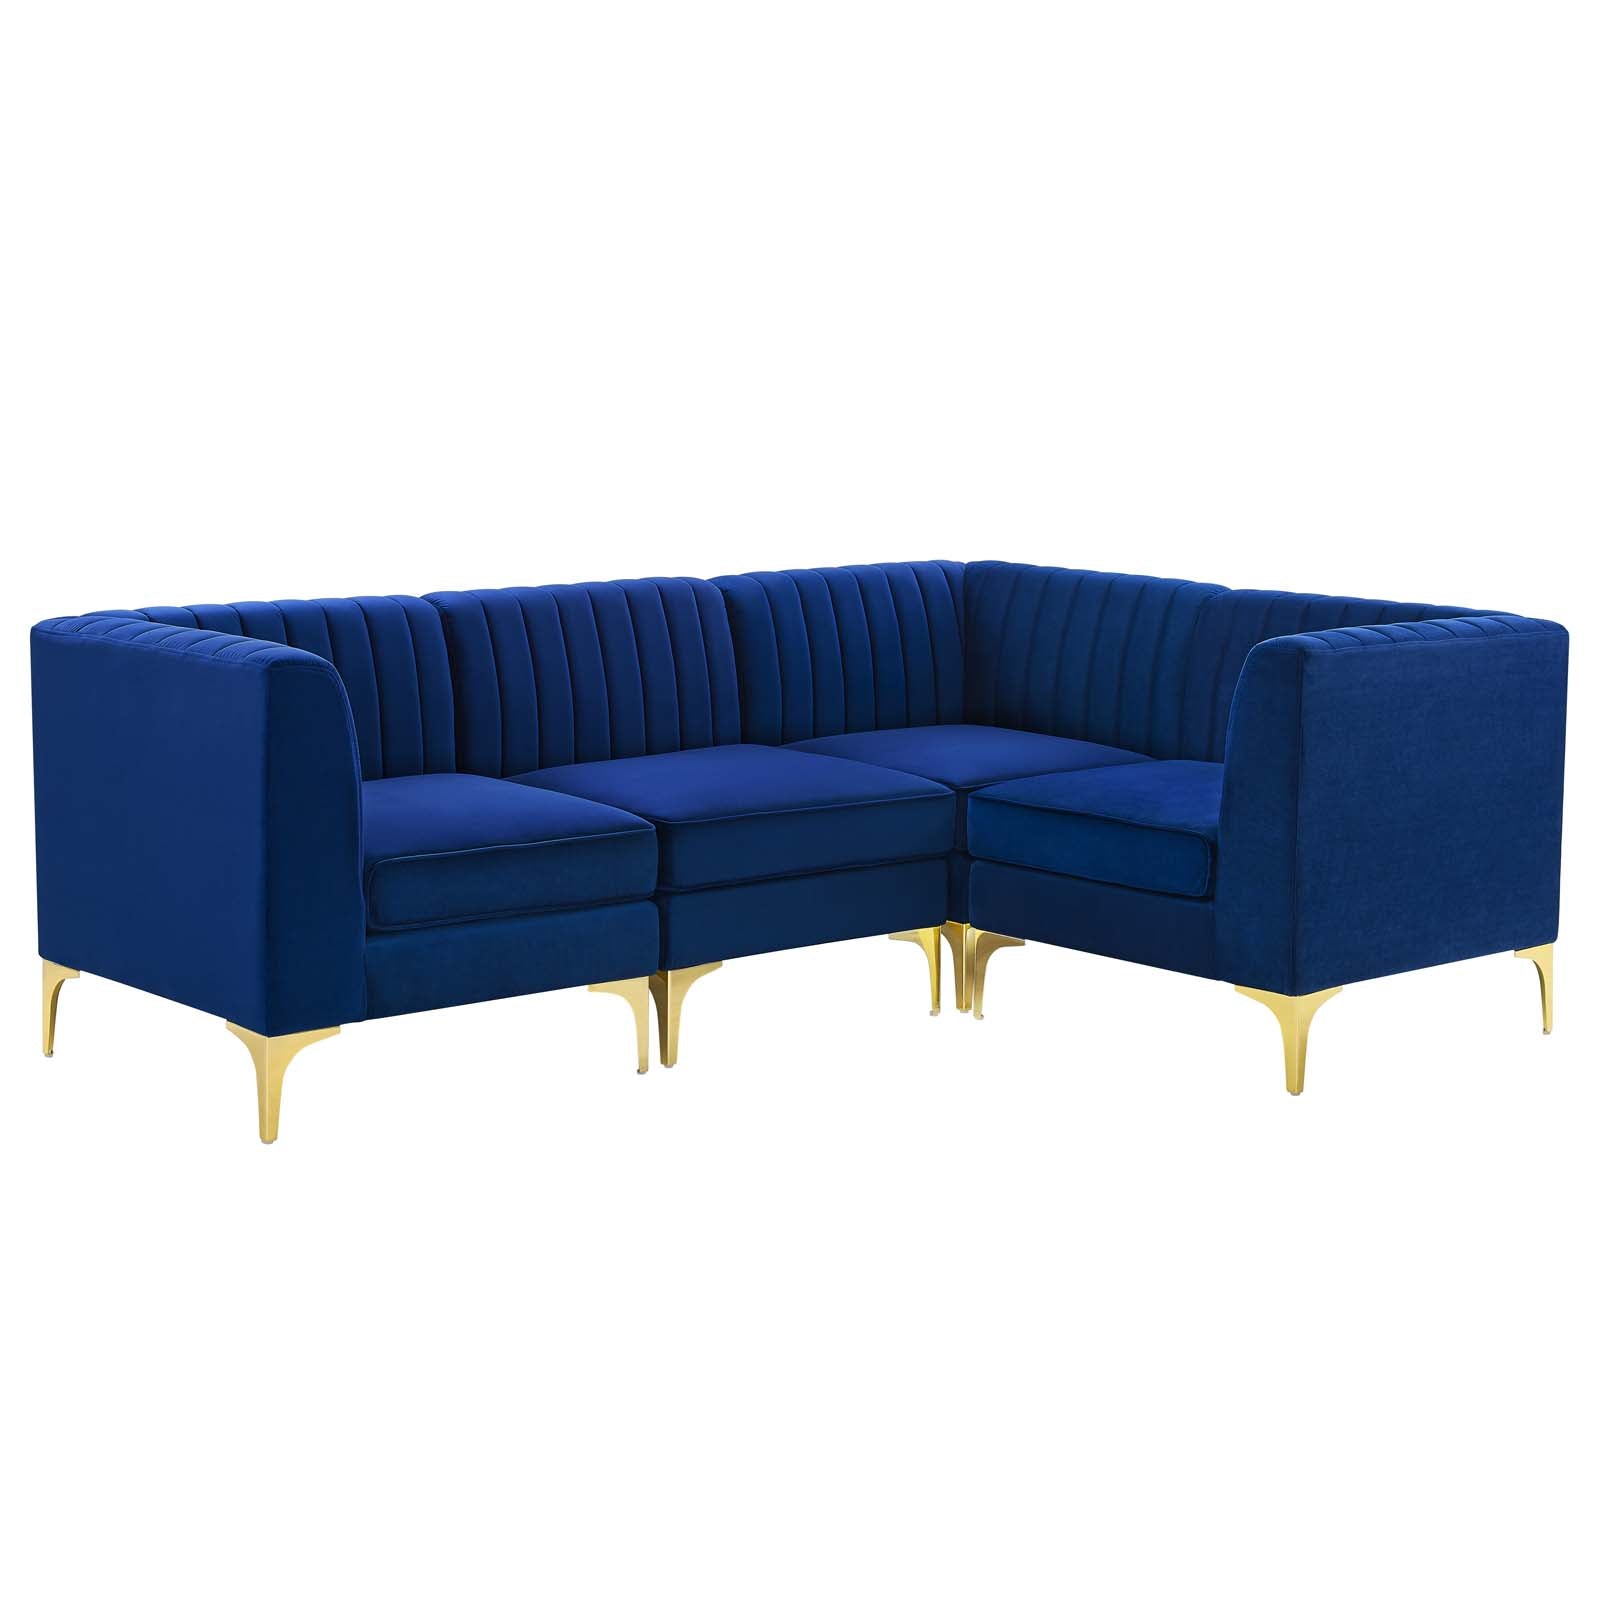 Modway Sectional Sofas - Triumph Channel Tufted Performance Velvet 4-Piece Sectional Sofa Navy